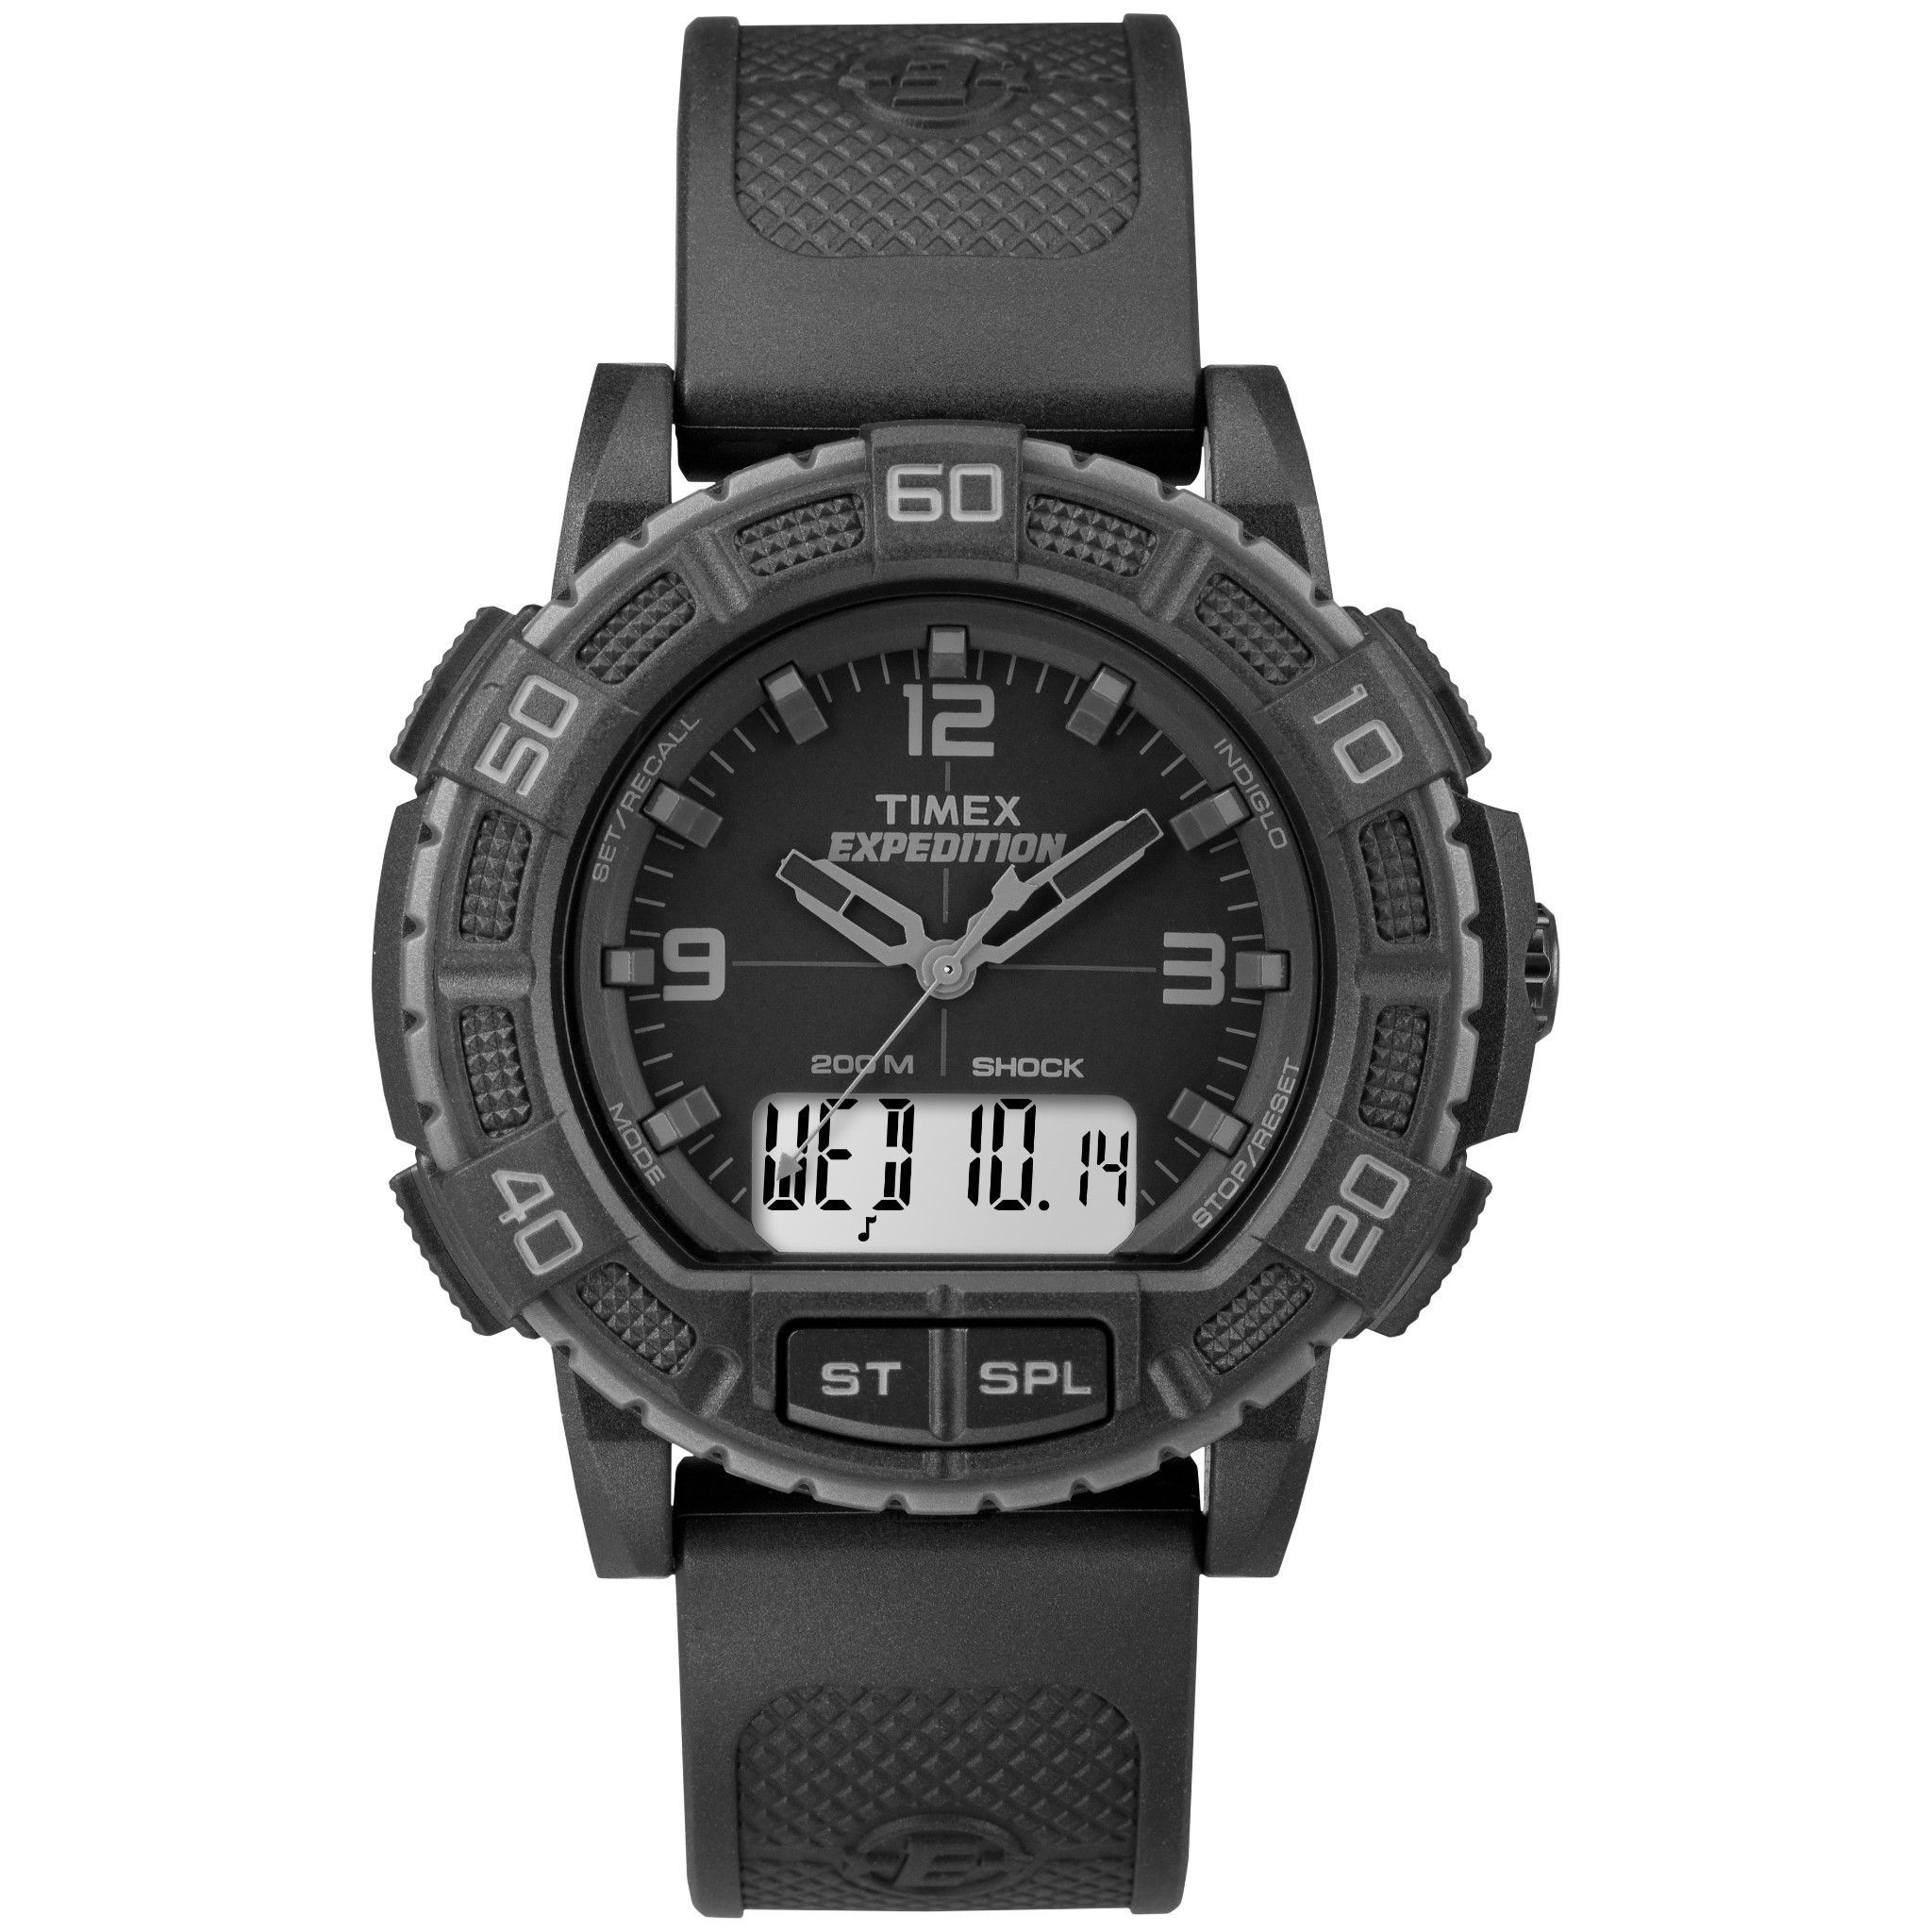  Timex - Đồng Hồ Thể Thao Nam Dây Cao Su TW4B00800 Expedition® Double Shock (Đen) 